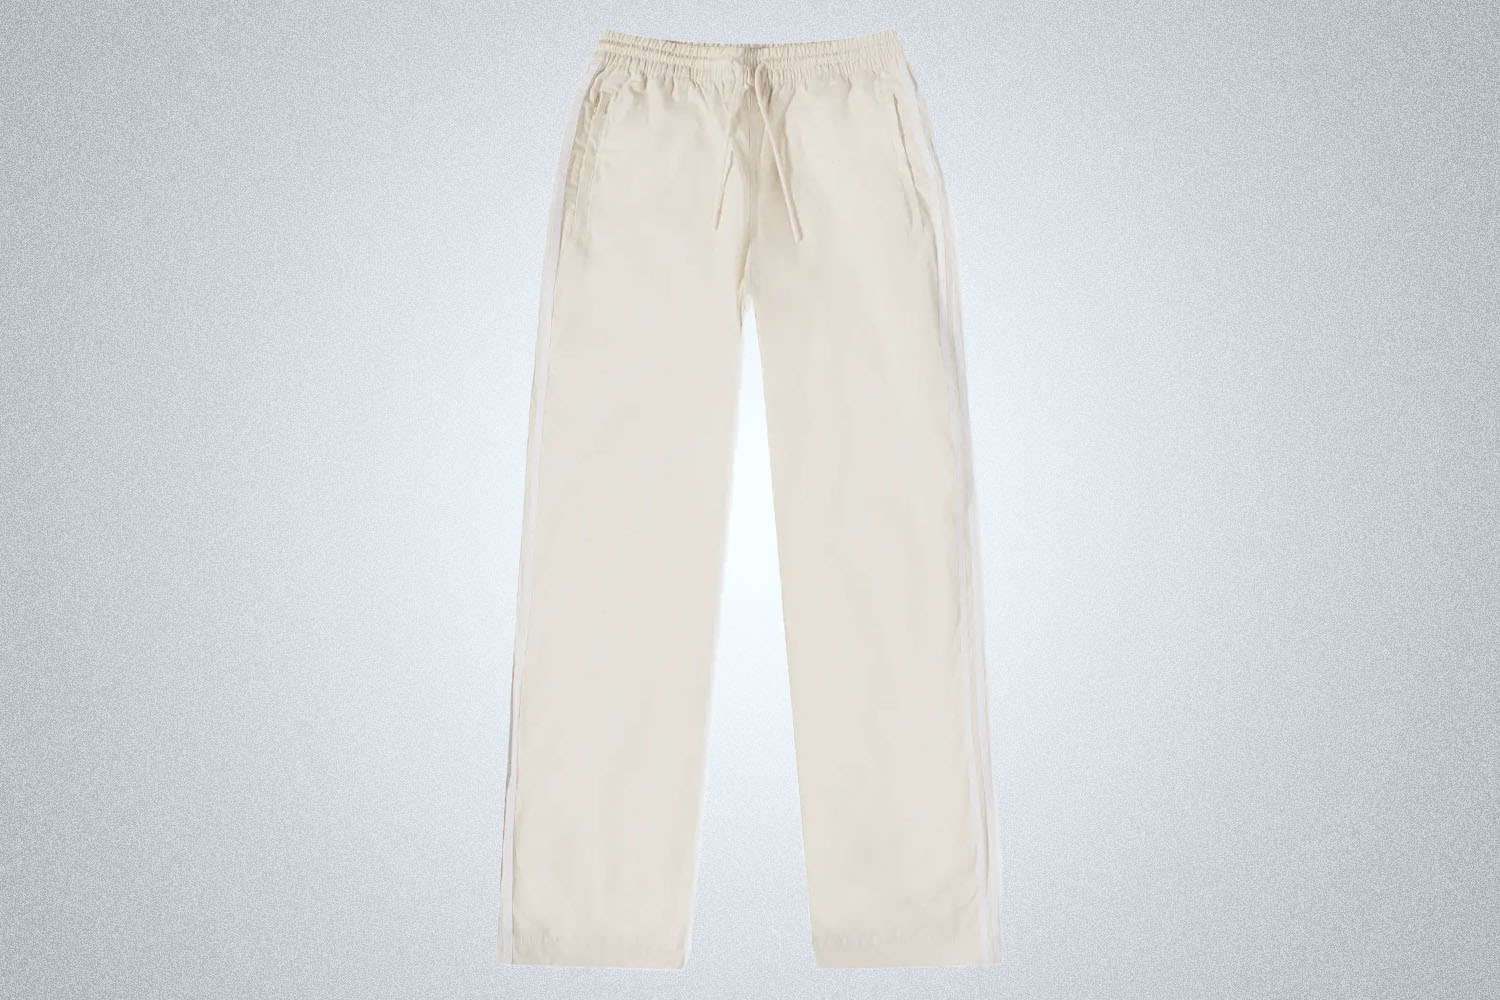 a pair of white pants from Adidas on a grey background